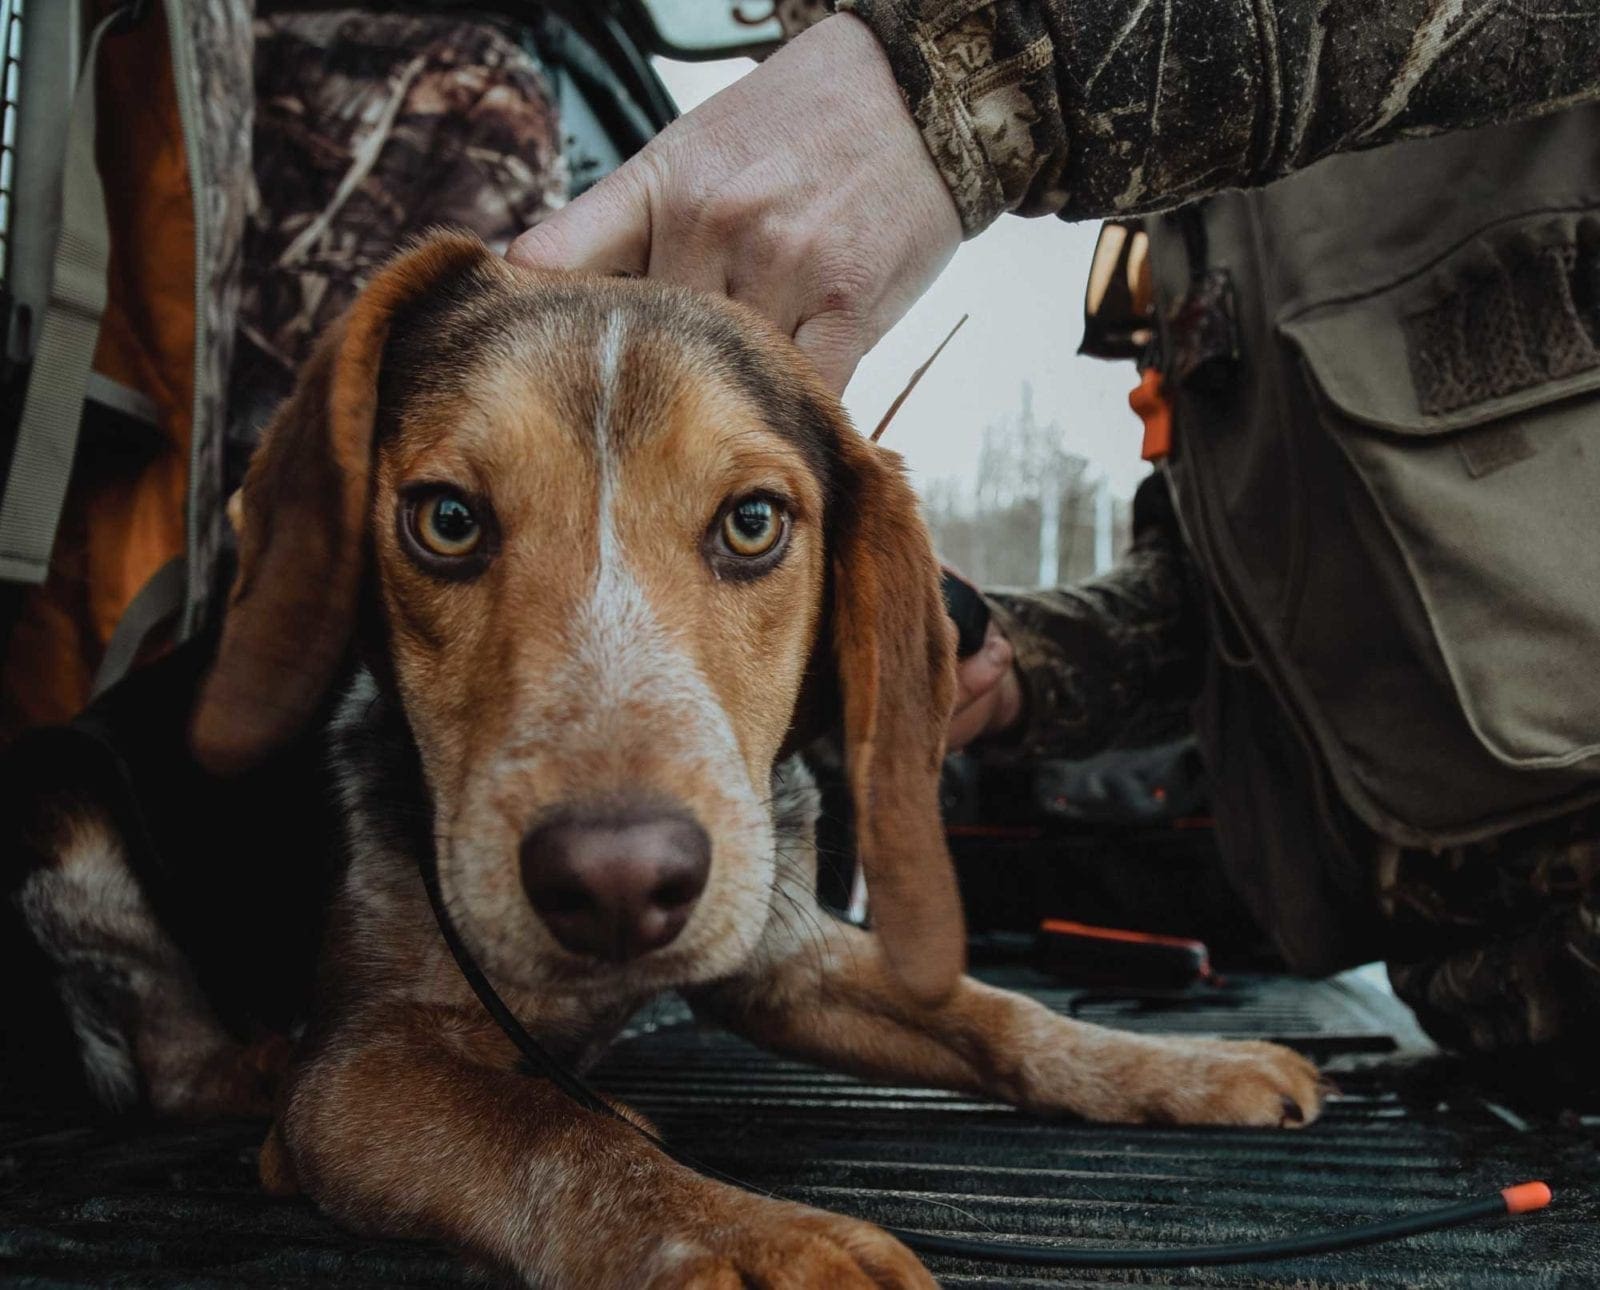 A Beagle gets a GPS tracking collar for rabbit hunting